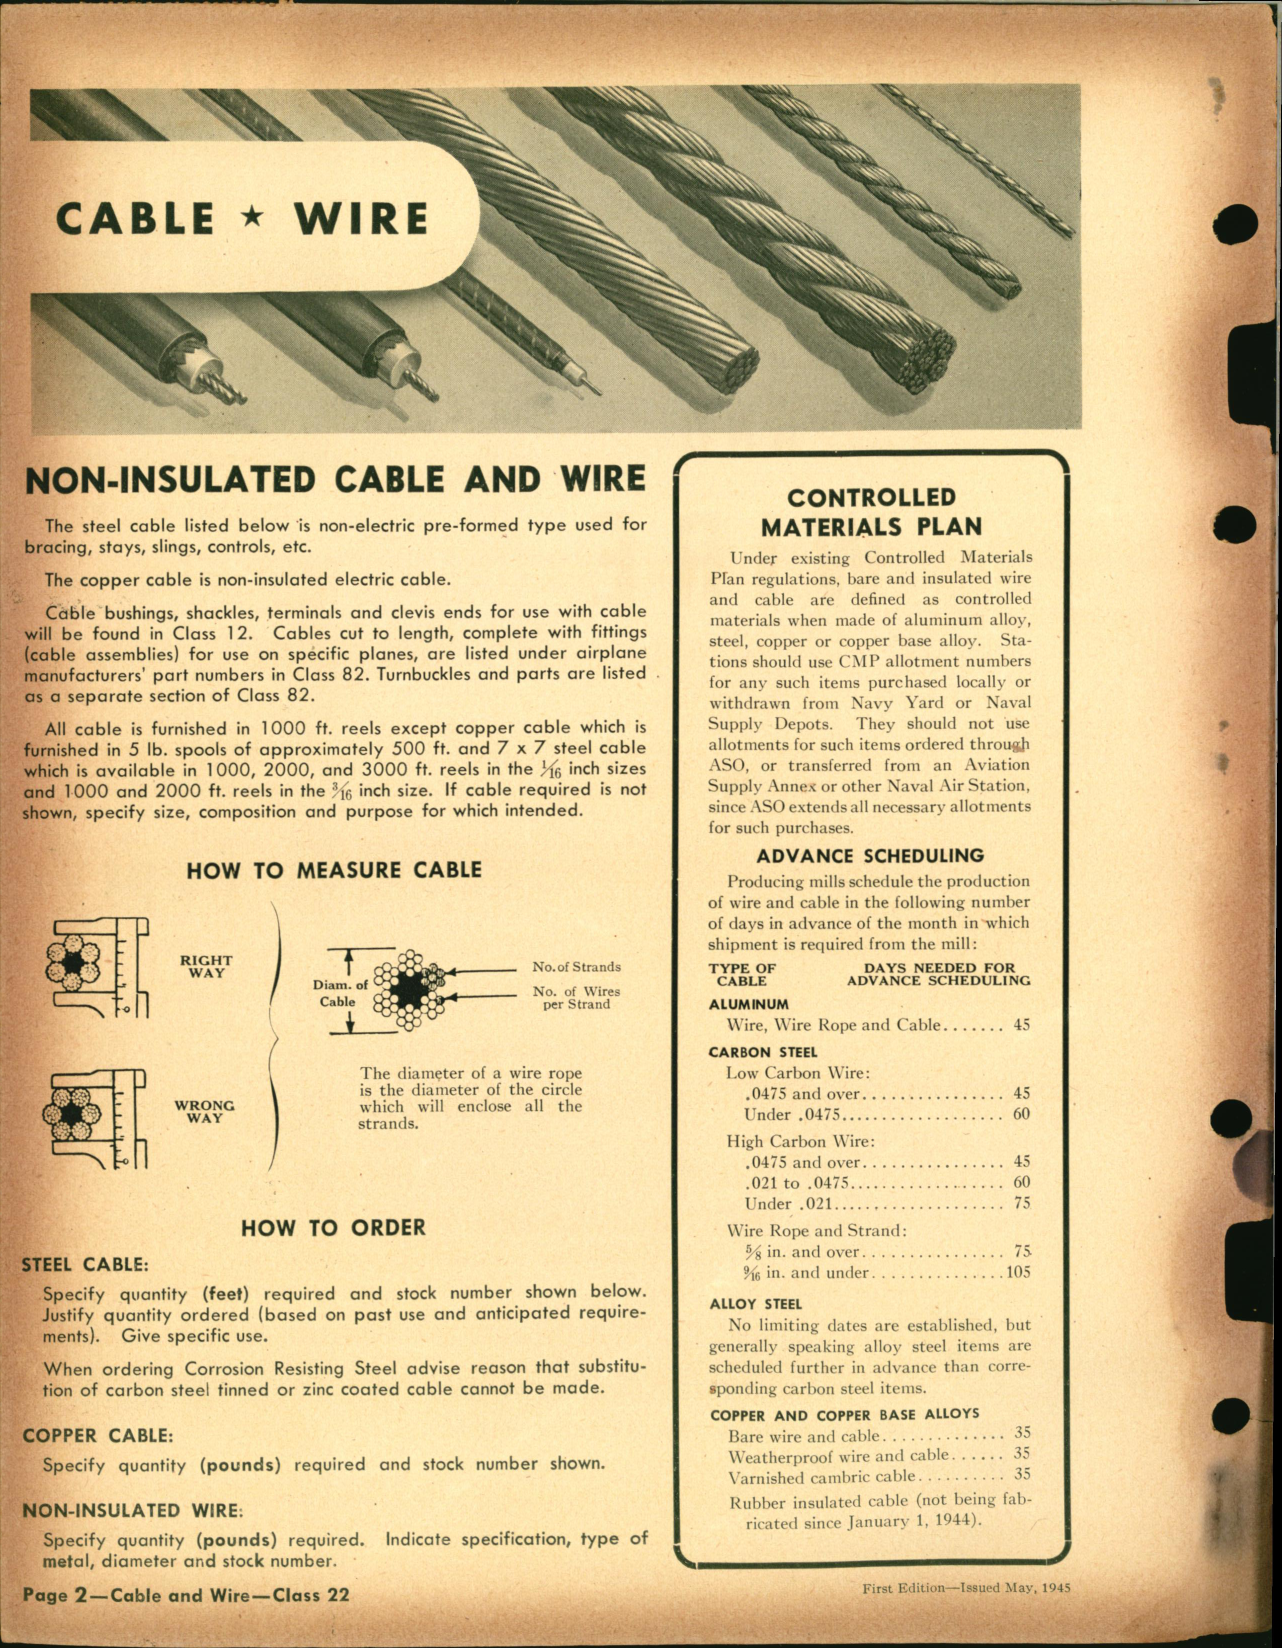 Sample page 2 from AirCorps Library document: Non-Insulated Cable and Wire